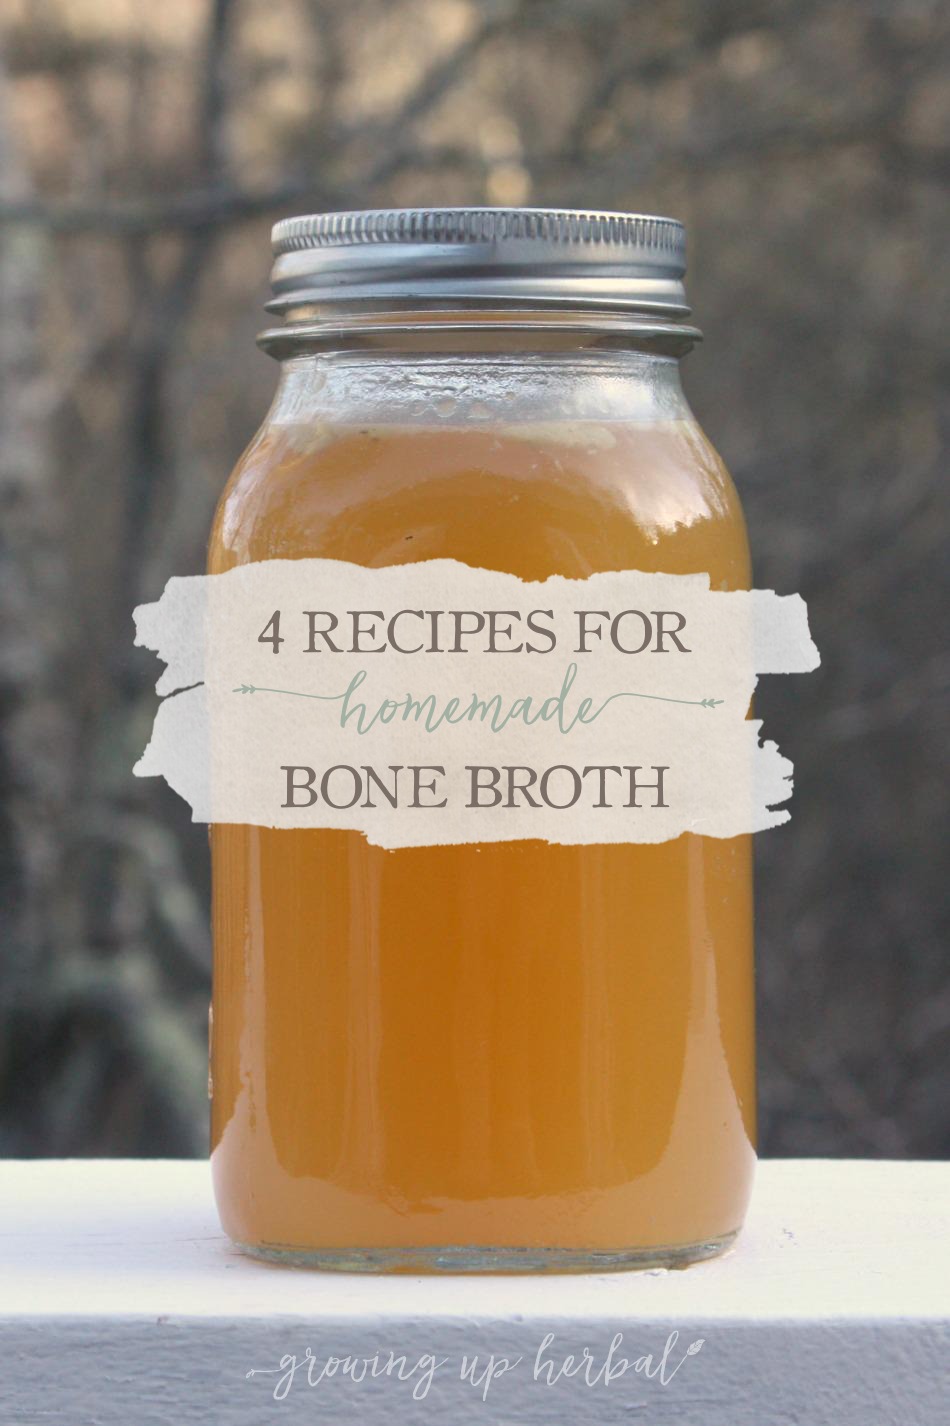 4 Recipes for Homemade Bone Broth | Growing Up Herbal | Help your kids enjoy their food more with homemade bone broth!